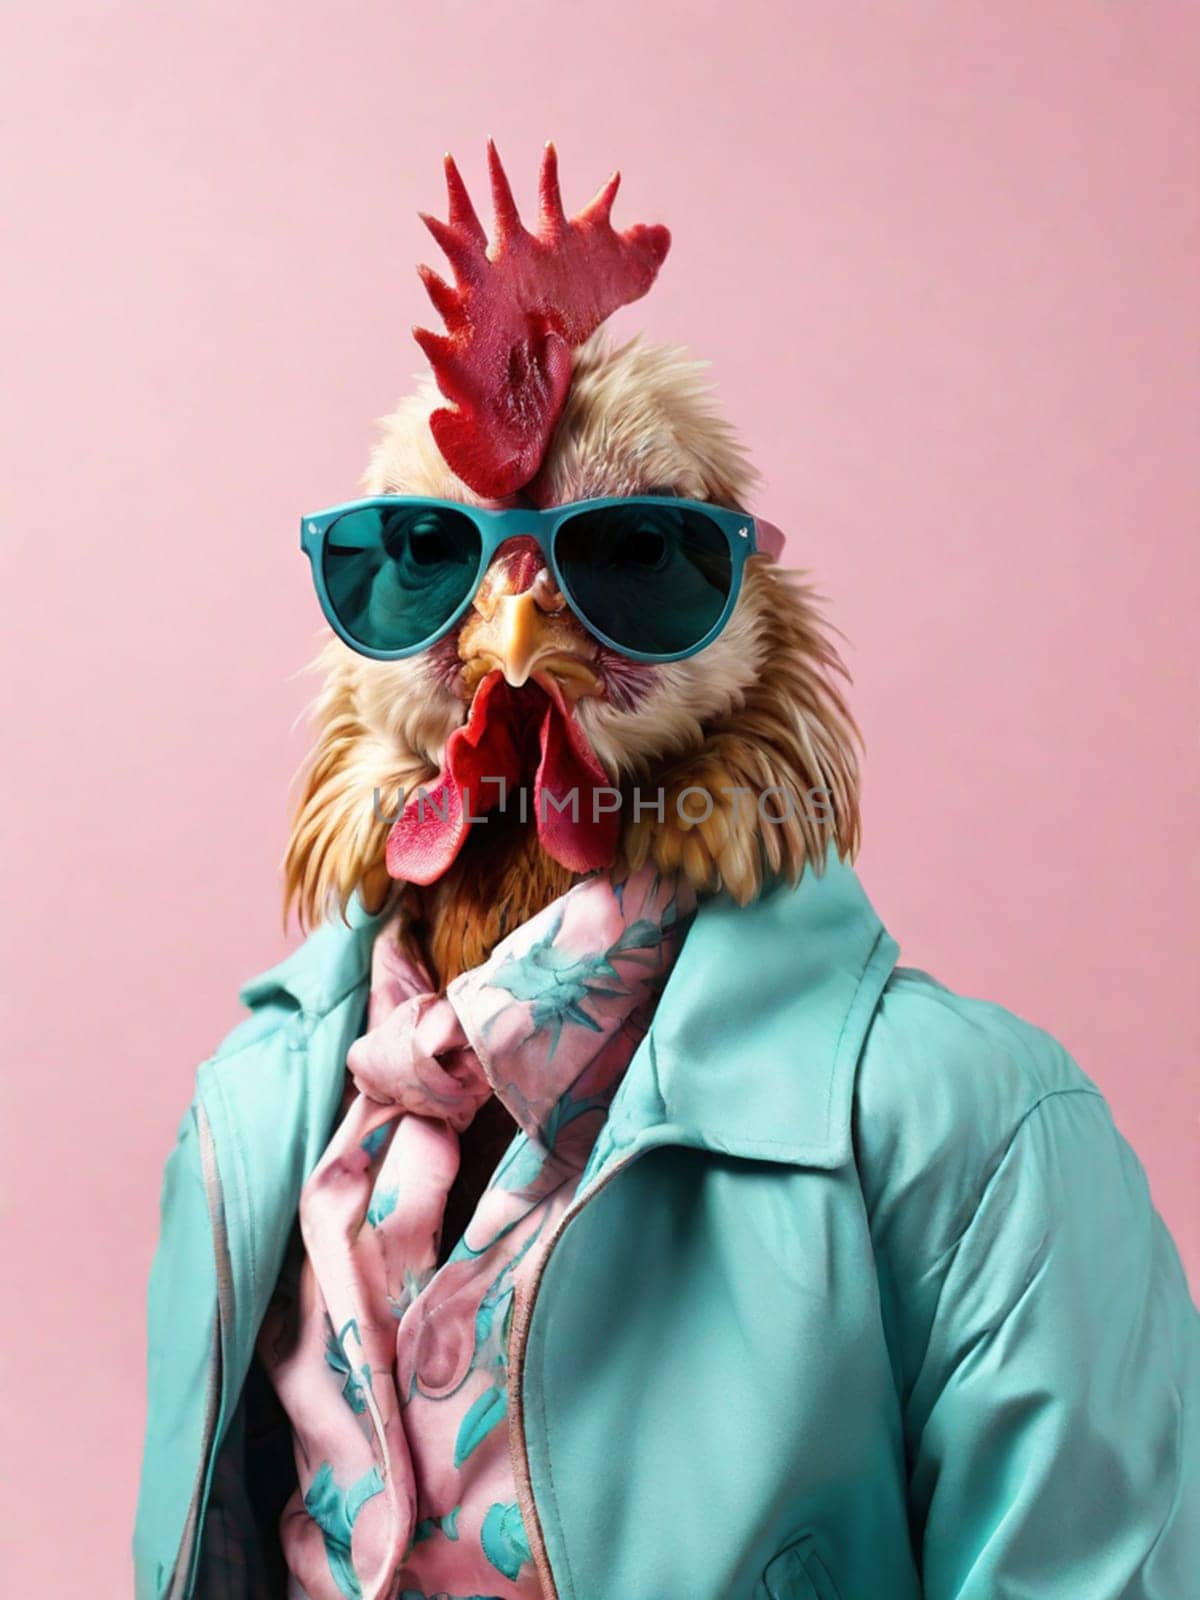 Fashionable rooster in sunglasses wearing a pink shirt and turquoise leather jacket on a pink background by Ekaterina34